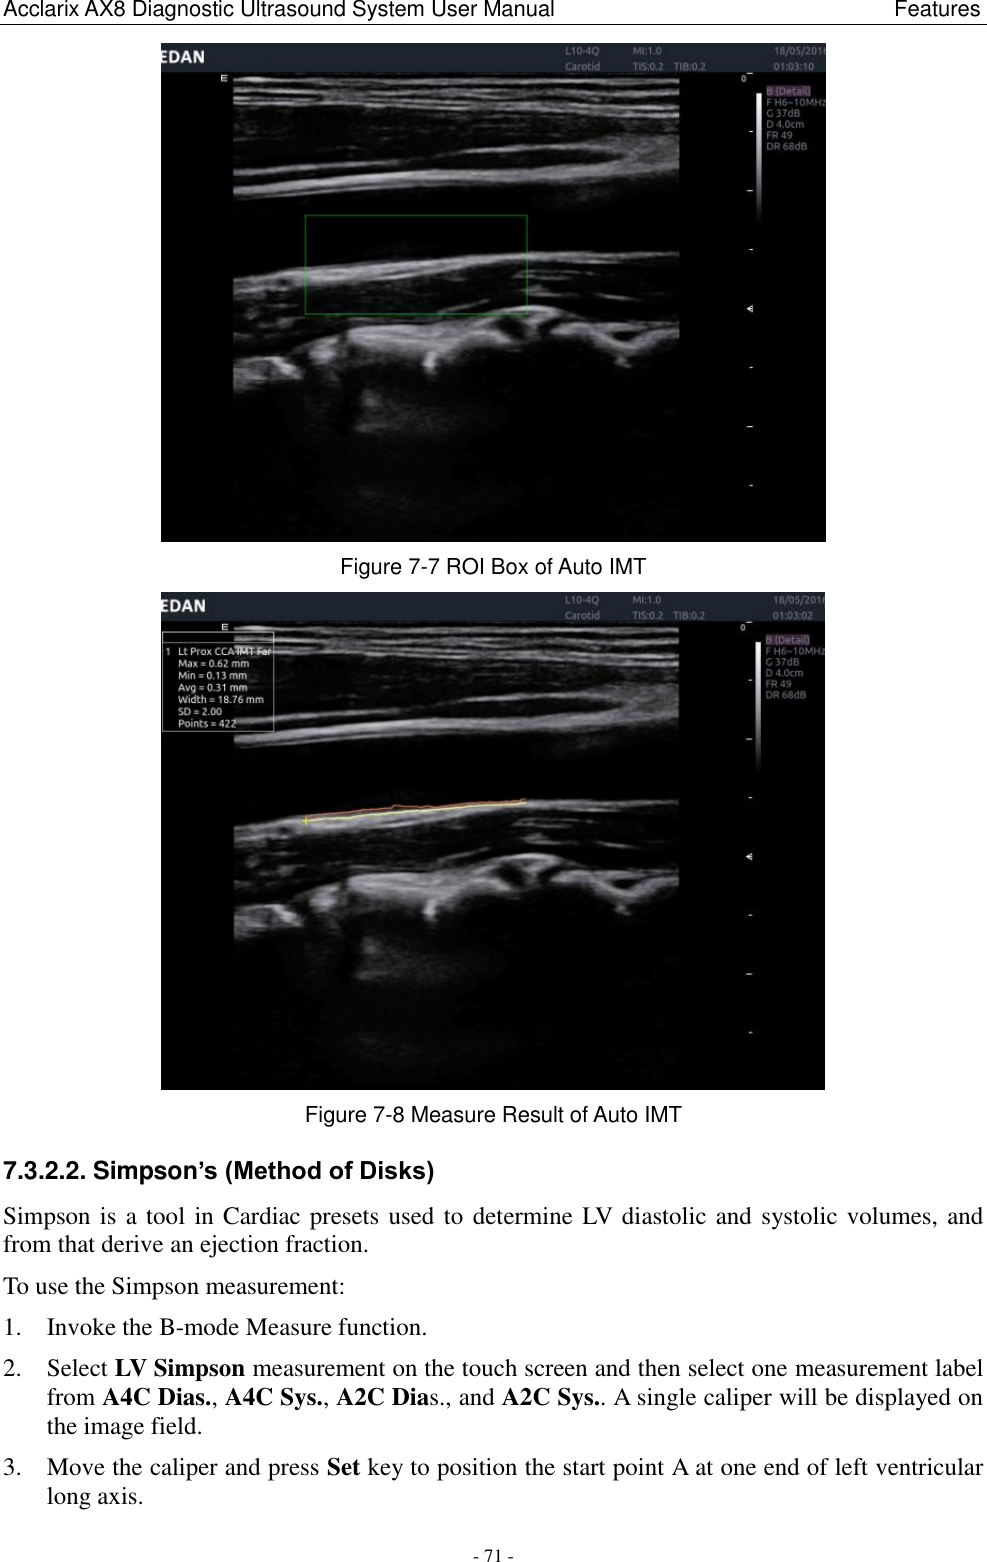 Acclarix AX8 Diagnostic Ultrasound System User Manual                                                              Features - 71 -  Figure 7-7 ROI Box of Auto IMT  Figure 7-8 Measure Result of Auto IMT 7.3.2.2. Simpson’s (Method of Disks) Simpson is a tool in Cardiac presets used to determine LV diastolic and systolic volumes, and from that derive an ejection fraction.   To use the Simpson measurement: 1. Invoke the B-mode Measure function. 2. Select LV Simpson measurement on the touch screen and then select one measurement label from A4C Dias., A4C Sys., A2C Dias., and A2C Sys.. A single caliper will be displayed on the image field.   3. Move the caliper and press Set key to position the start point A at one end of left ventricular long axis. 